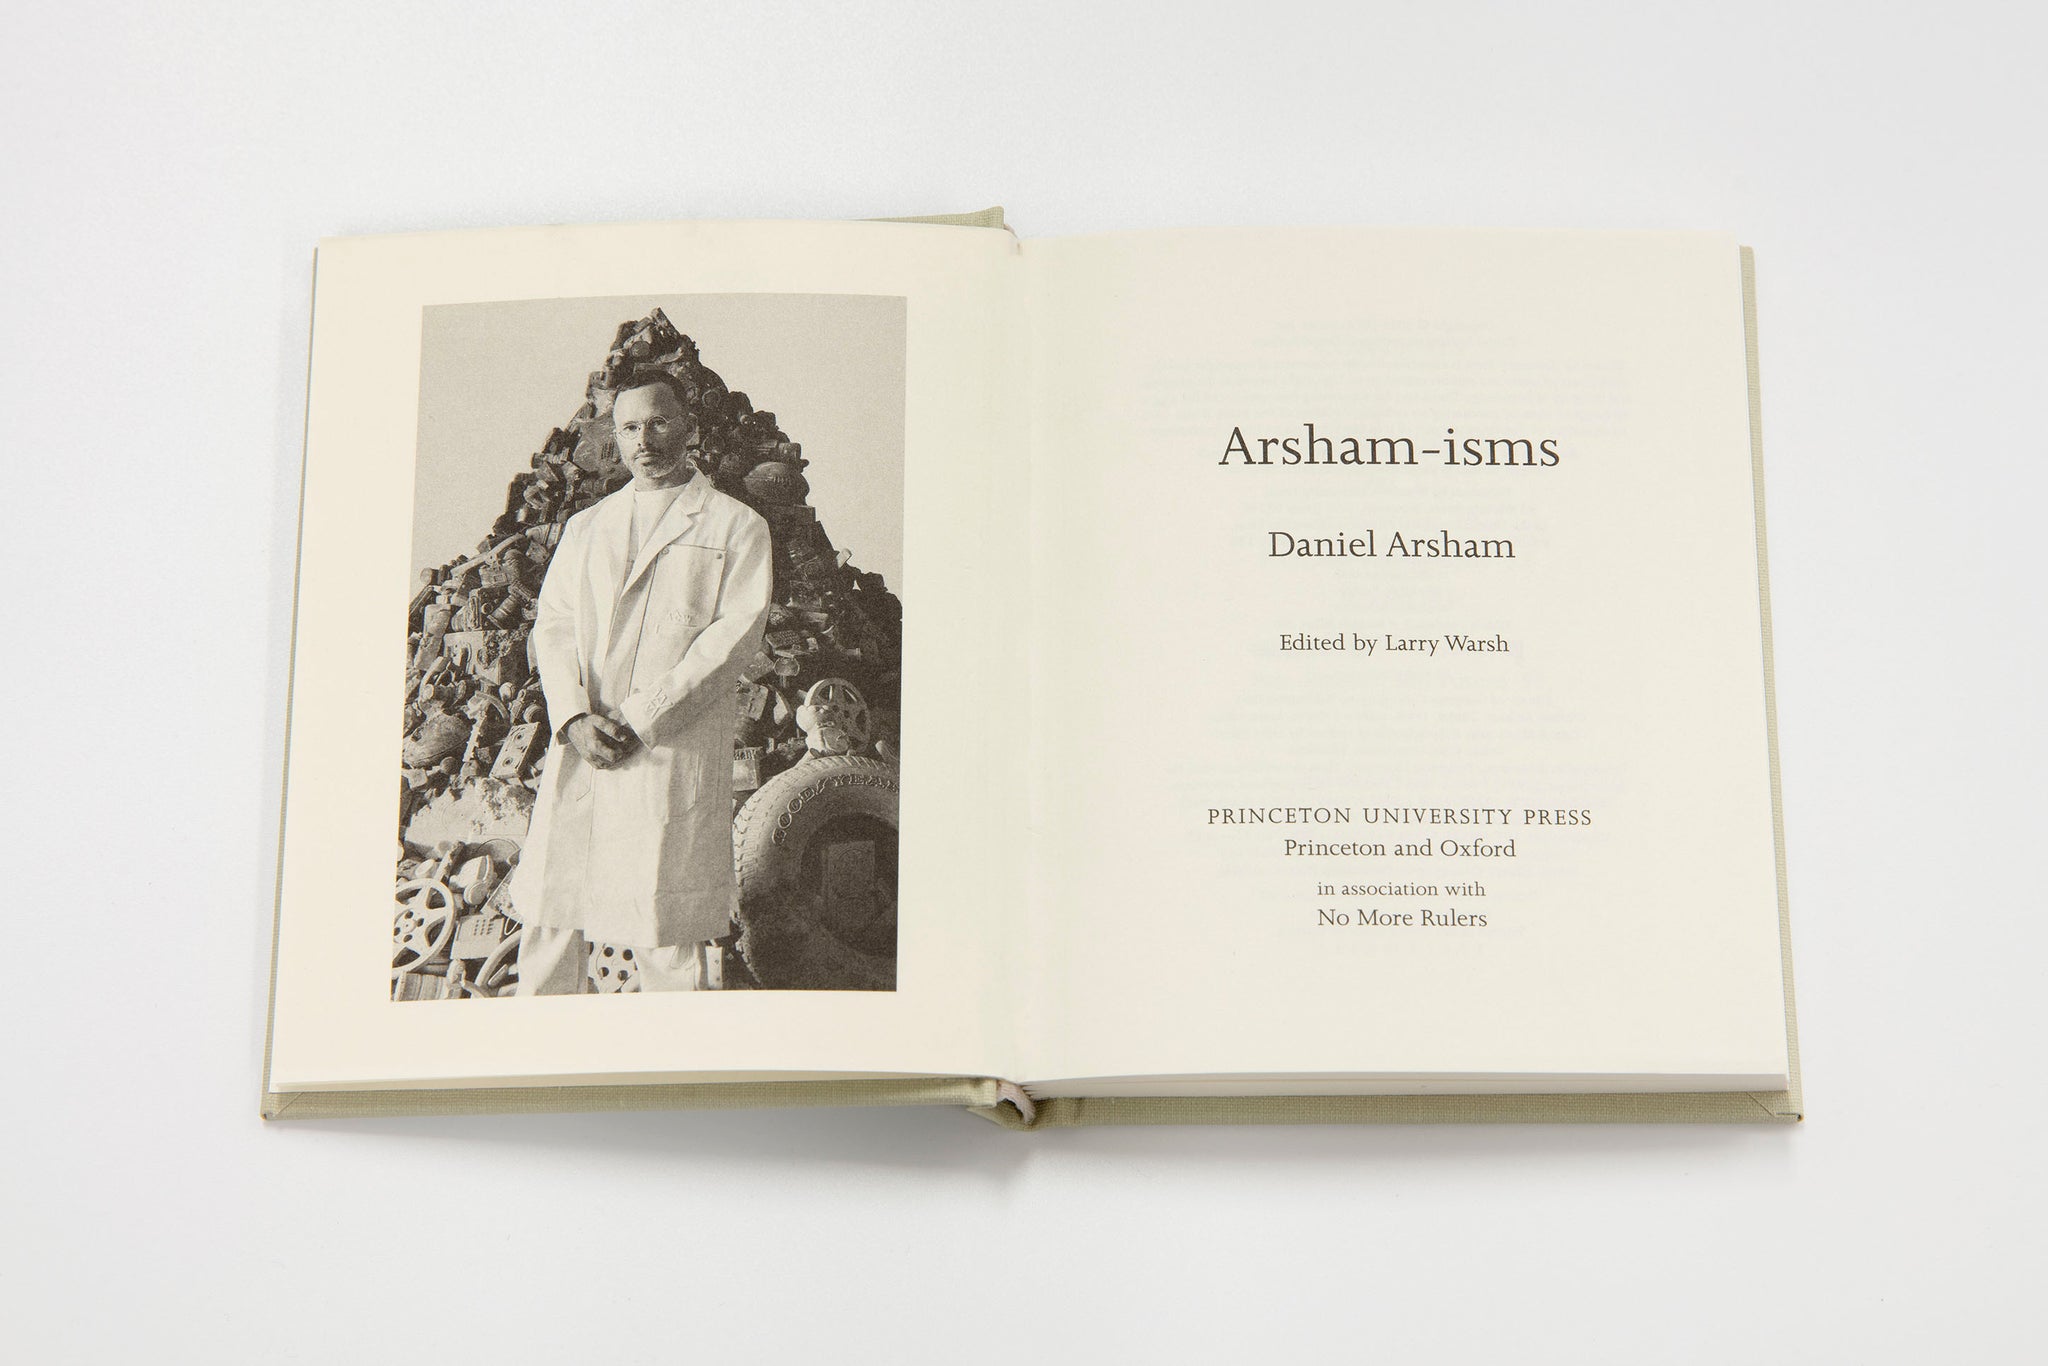 The book with Daniel Arsham's preliminary sketches